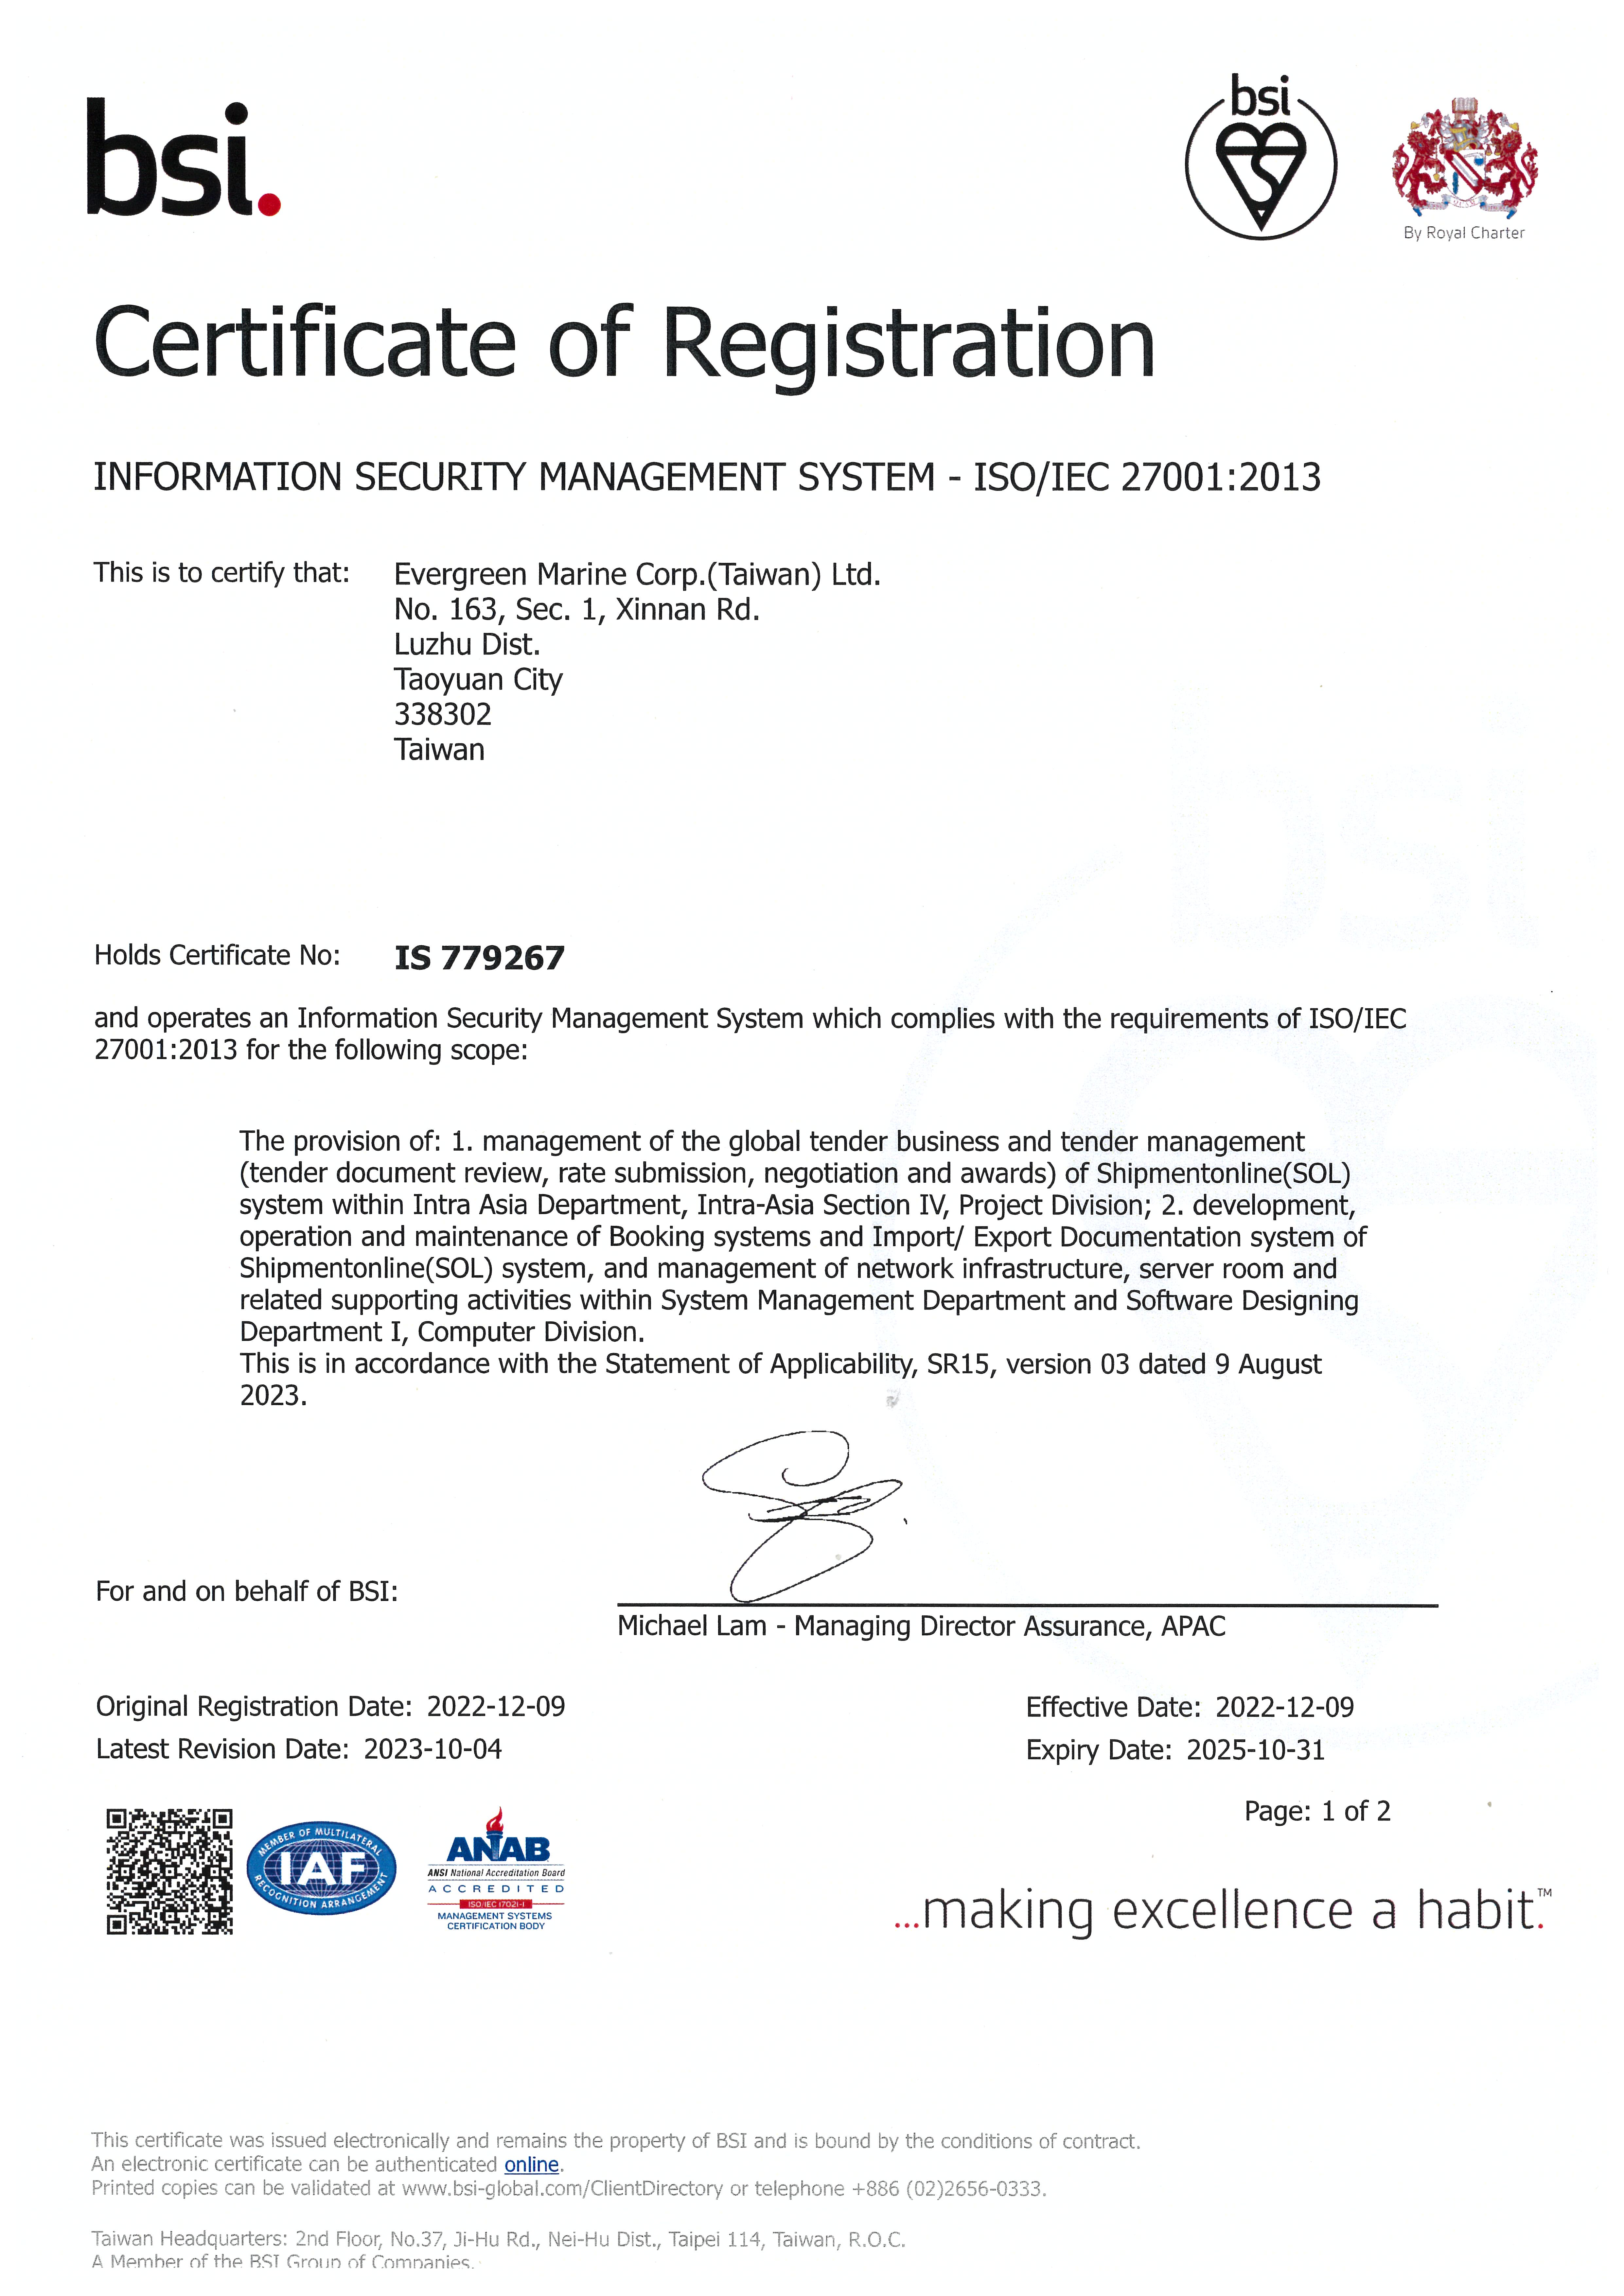 ISO 27001 Certificate